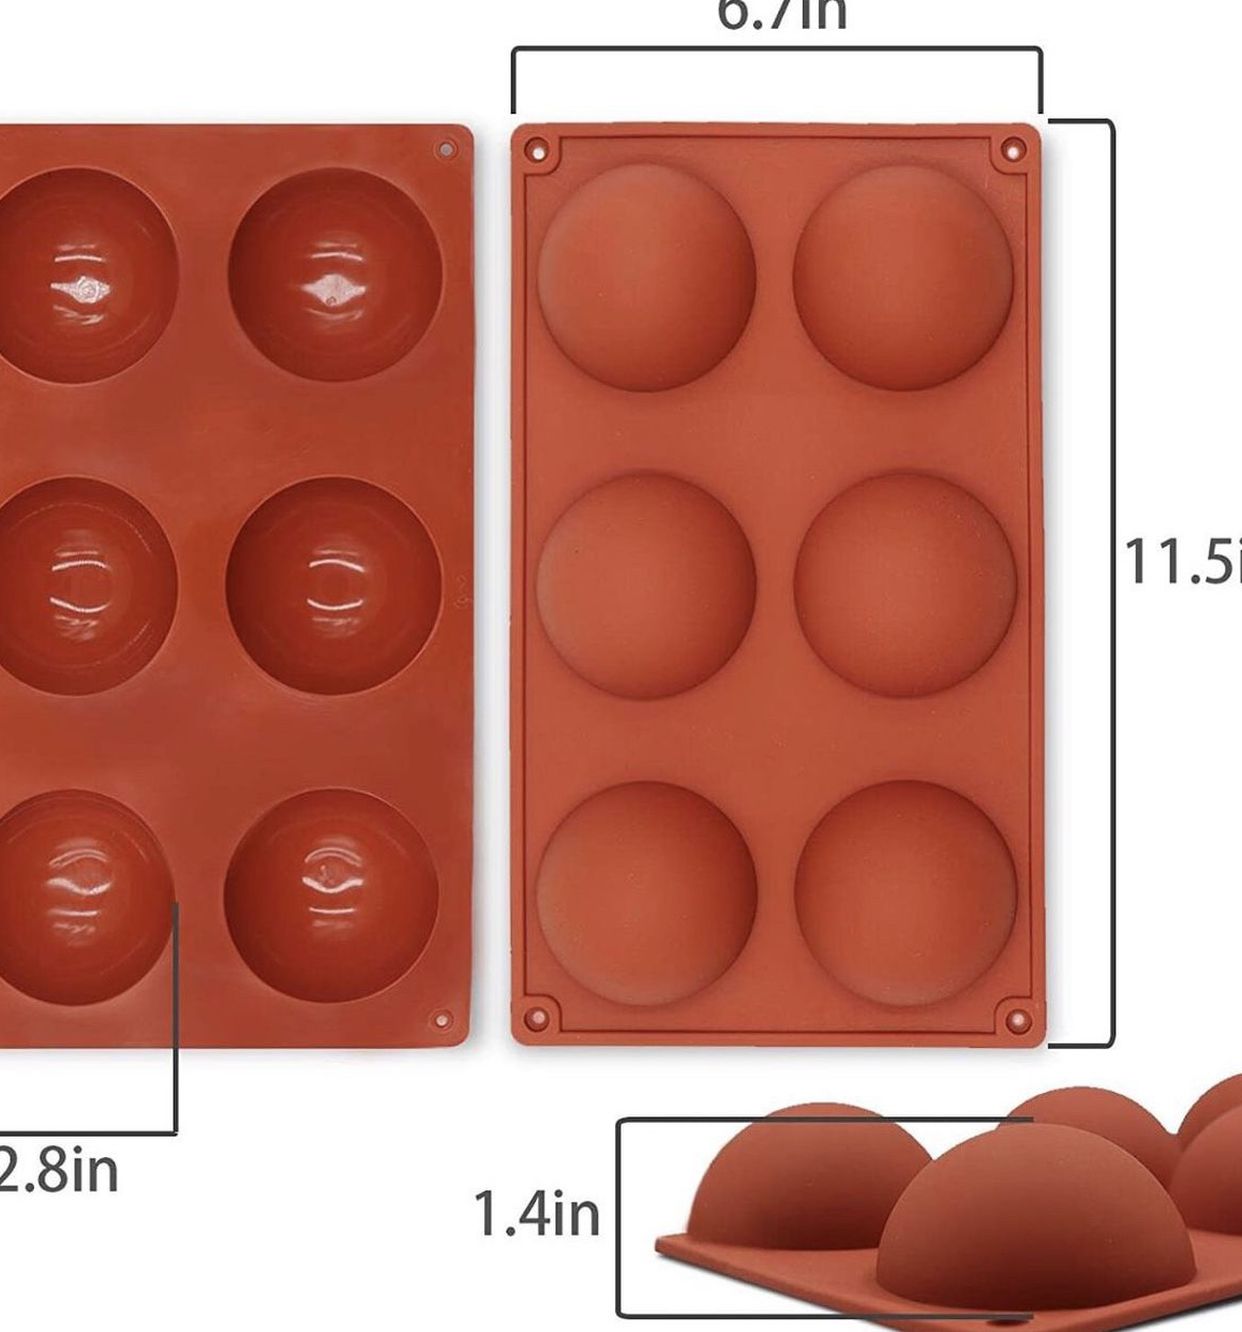 Semi Sphere Silicone Mold for Chocolate - Baking Mold for Making Hot Chocolate Bomb,Cake,Jelly, Pudding,Dome Mousse DIY with 2pcs Different Size Molds